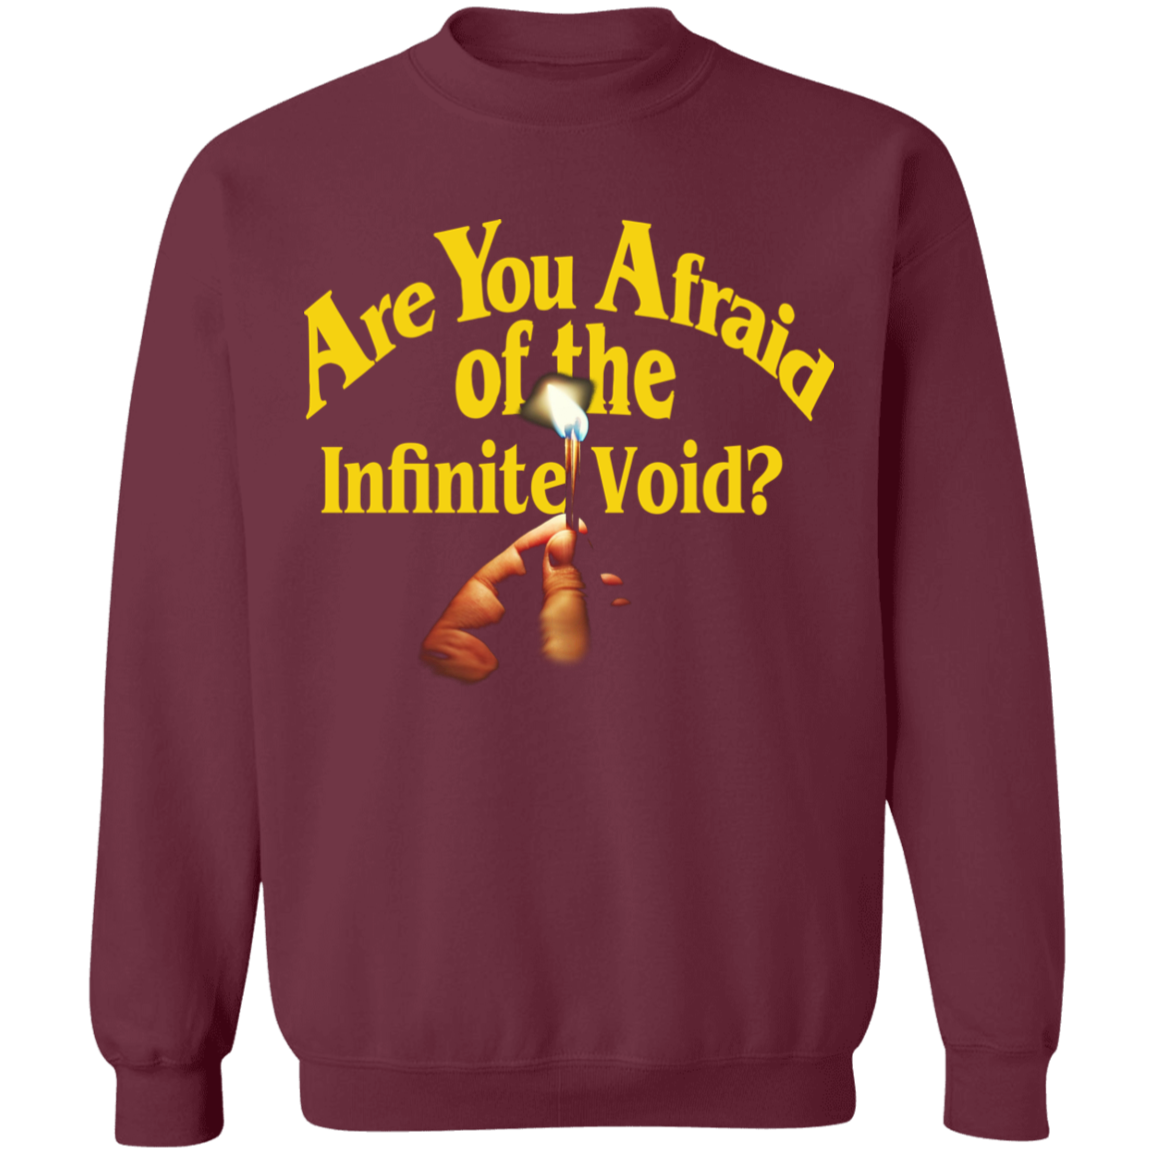 Are You Afraid of the Infinite Void? Crewneck Jumper